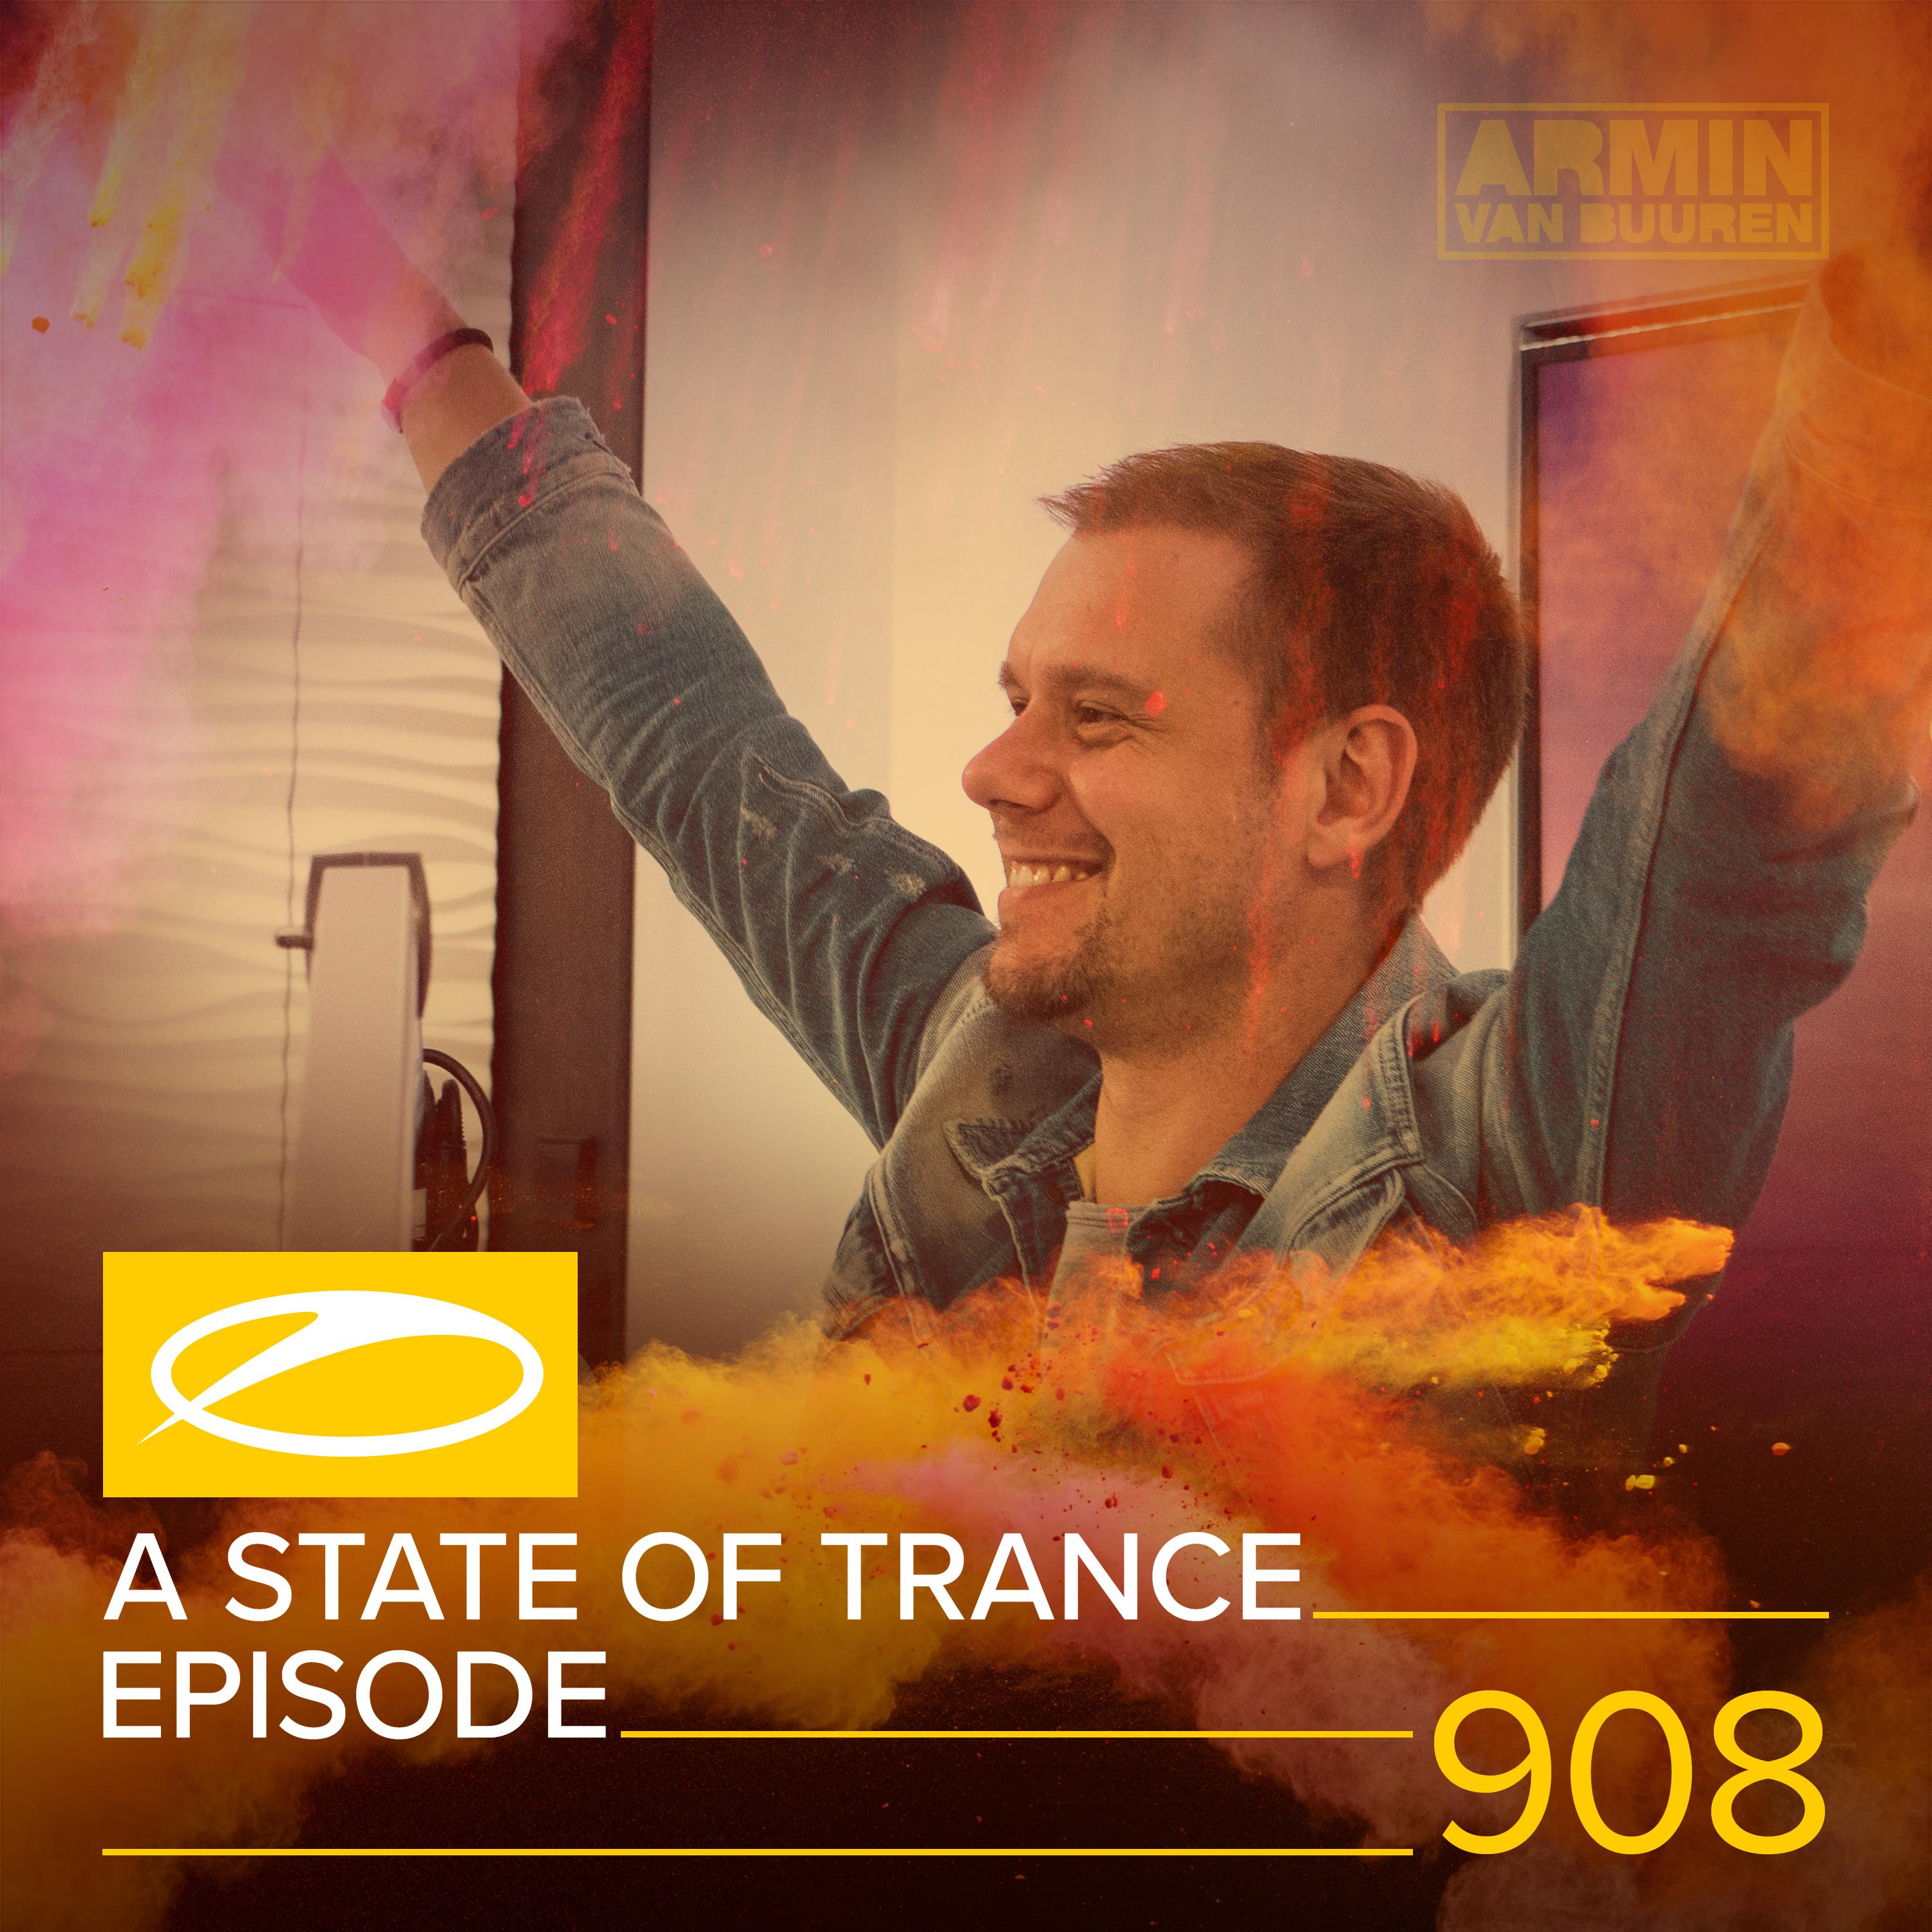 Neptune Project - Proteus (ASOT 908) (The Thrillseekers Remix)